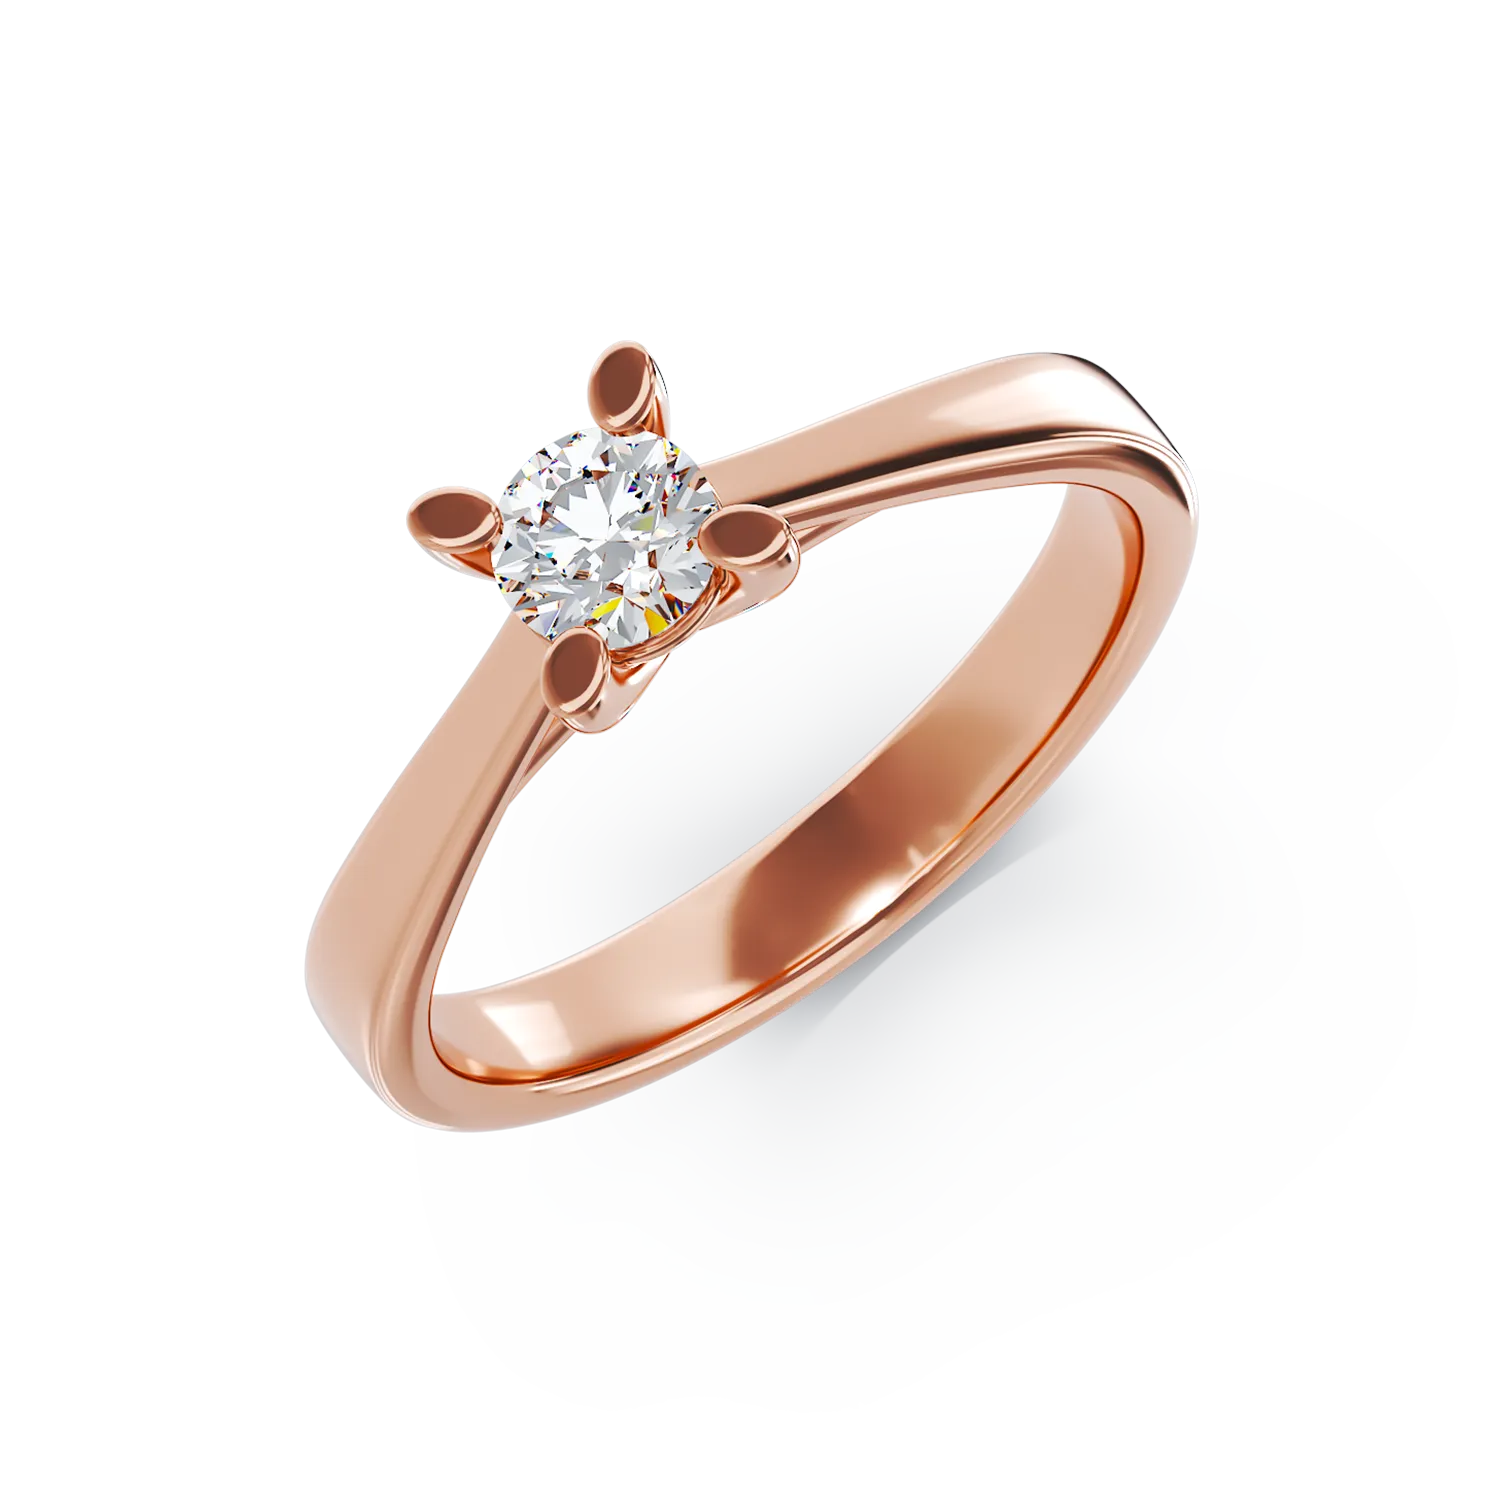 18K rose gold engagement ring with a 0.15ct solitaire diamond